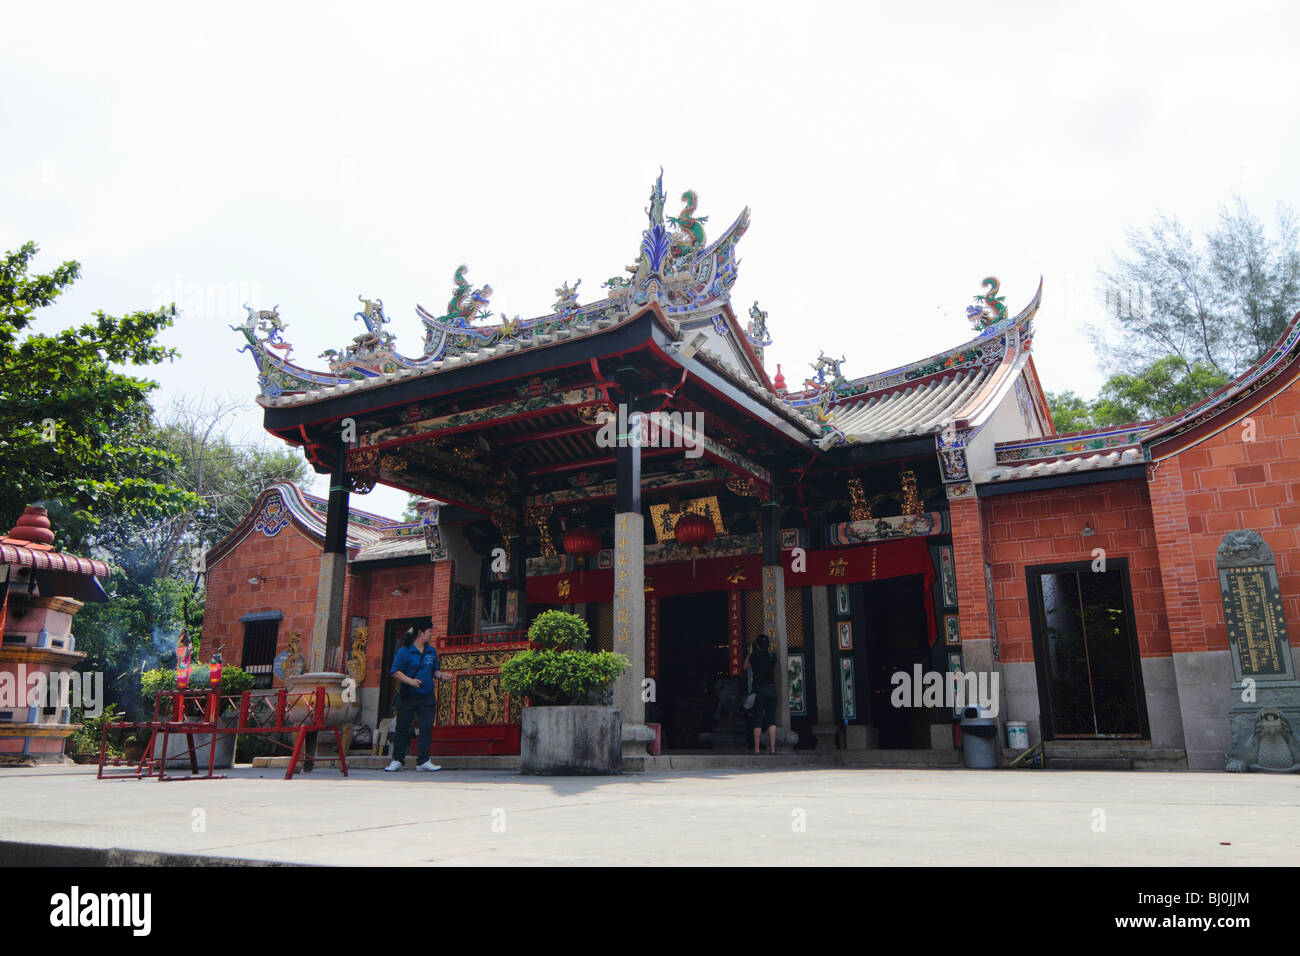 Exterior view of the Snake Temple in Penang, Malaysia Stock Photo